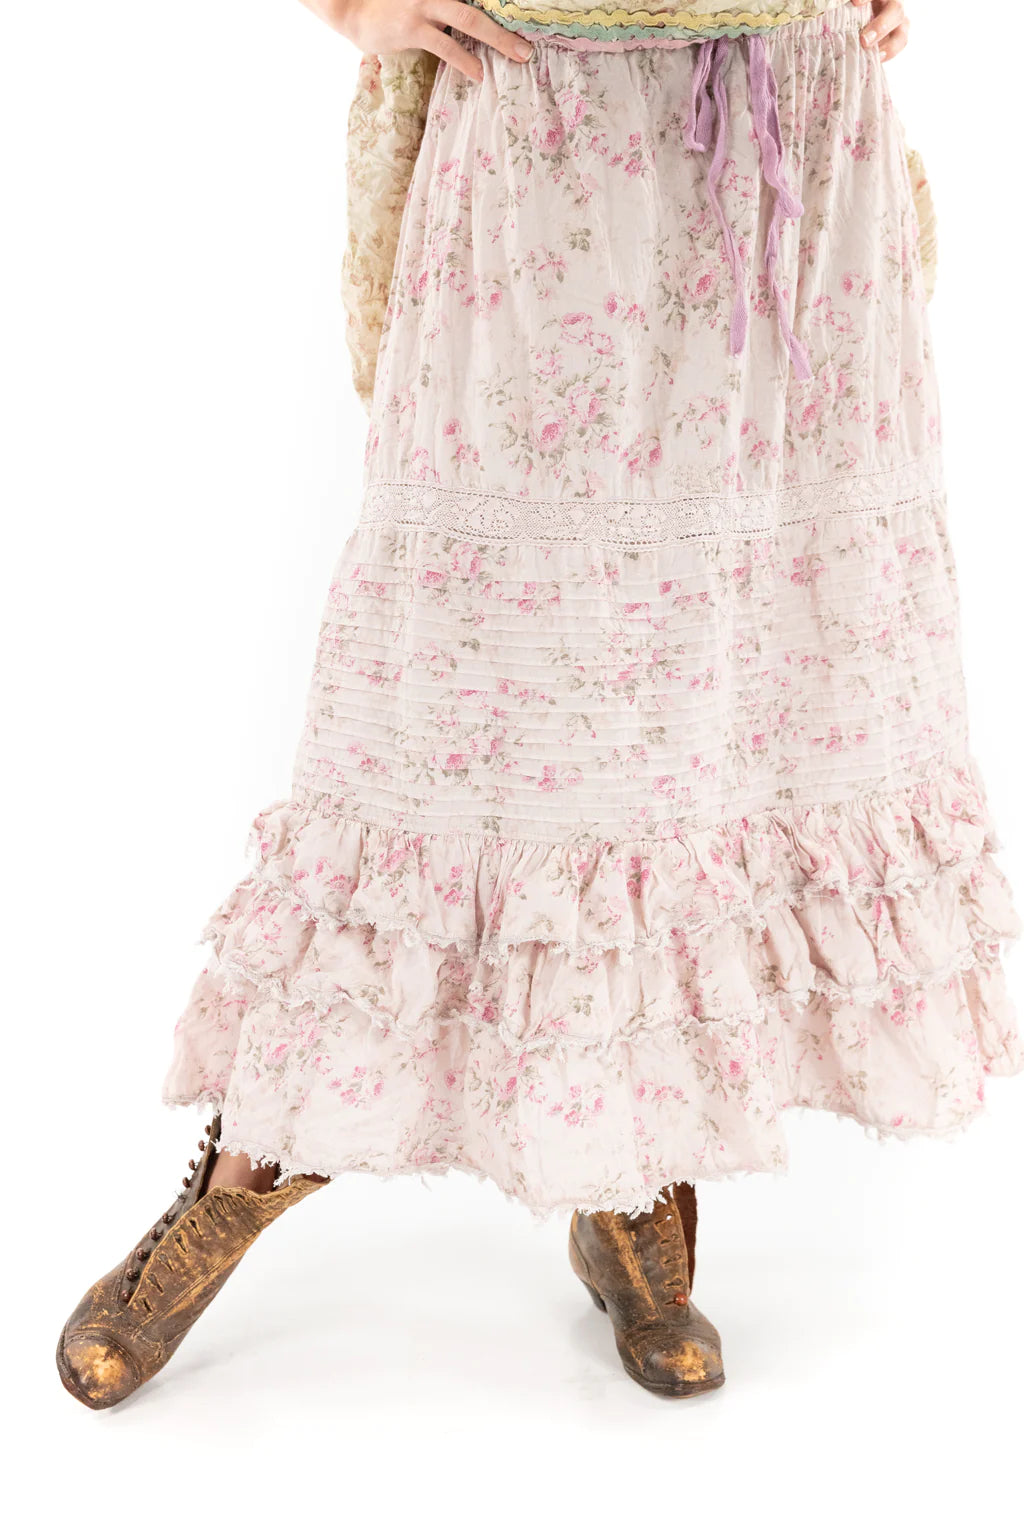 Penelope Ruffled Skirt in Molly by Magnolia Pearl